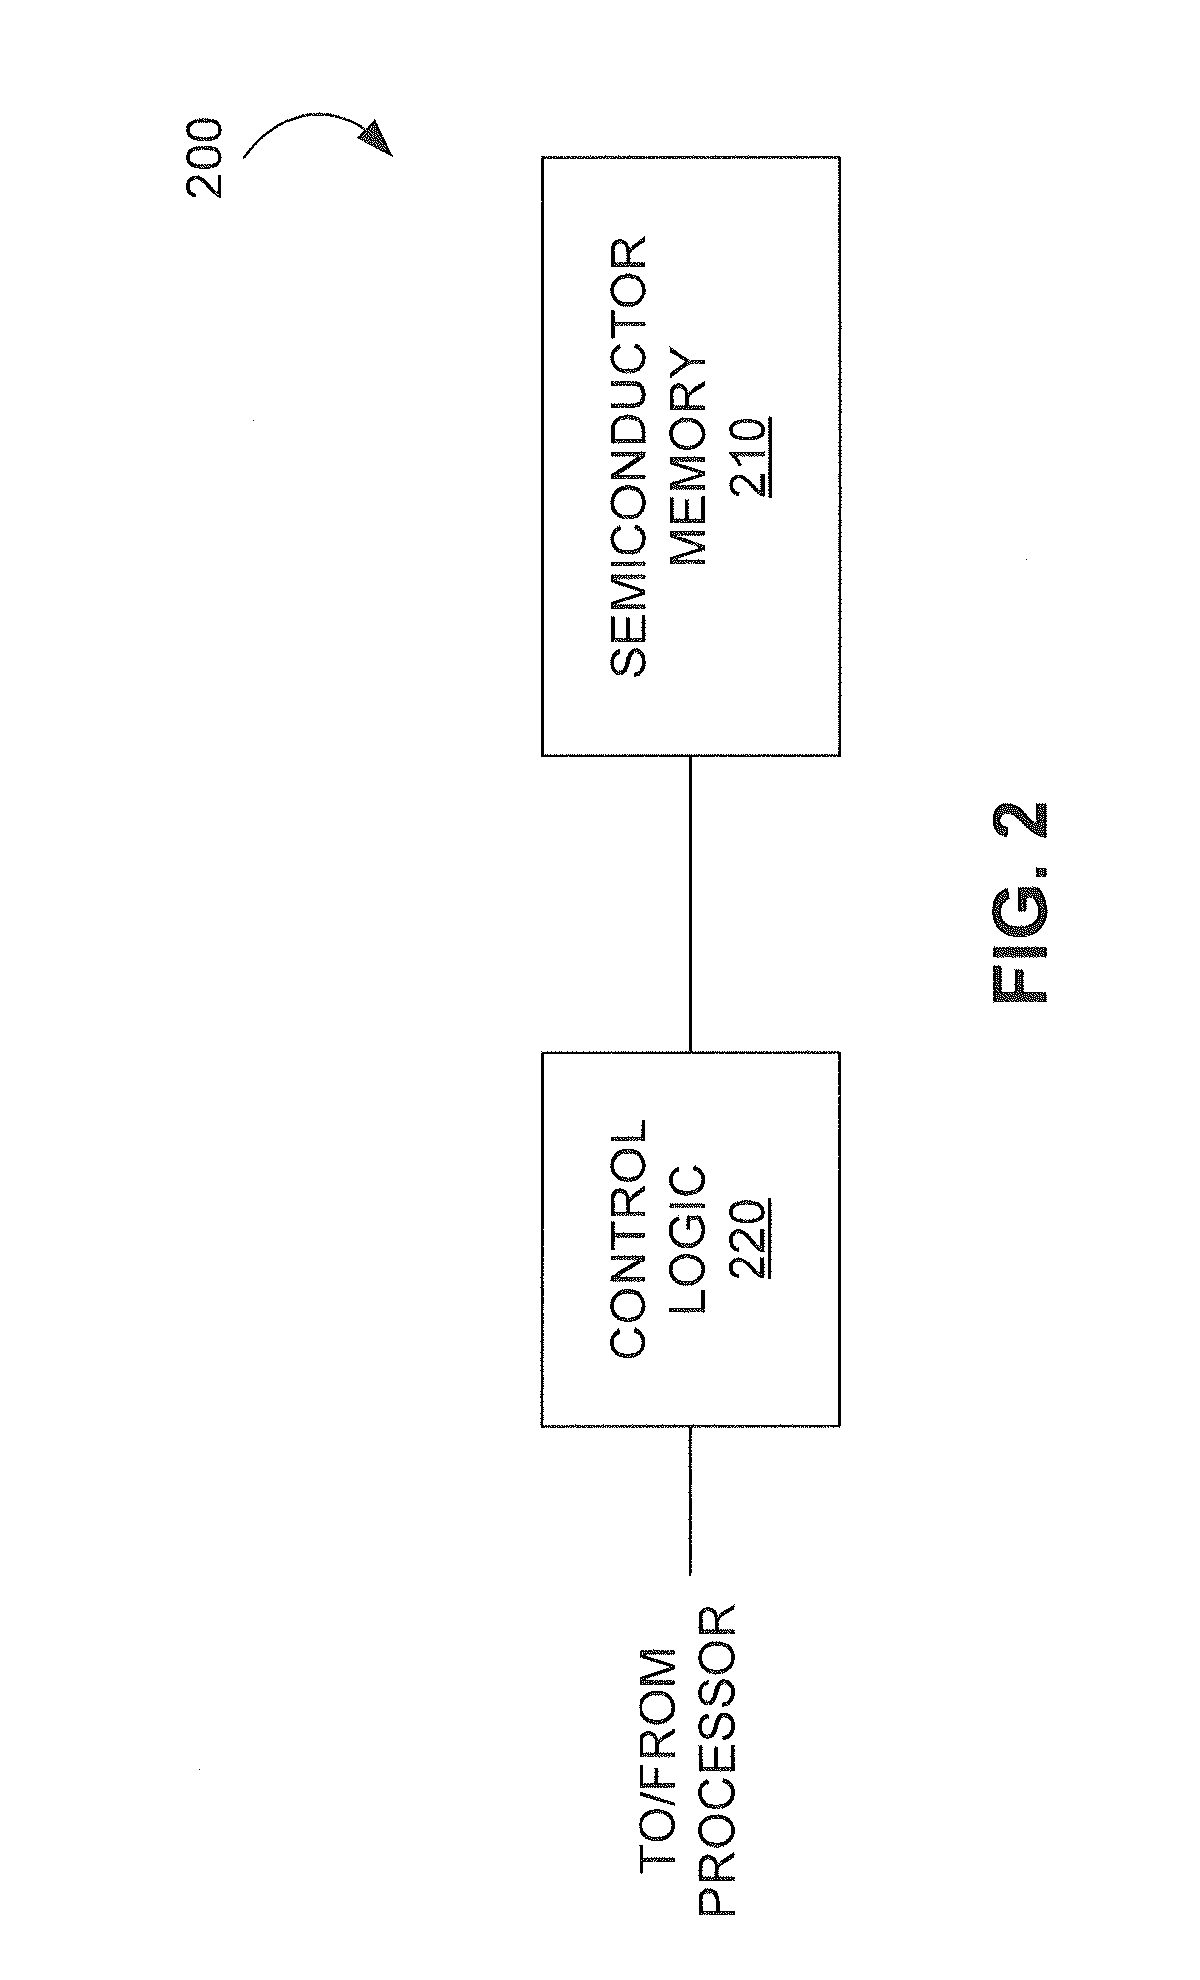 Defect management for a semiconductor memory system